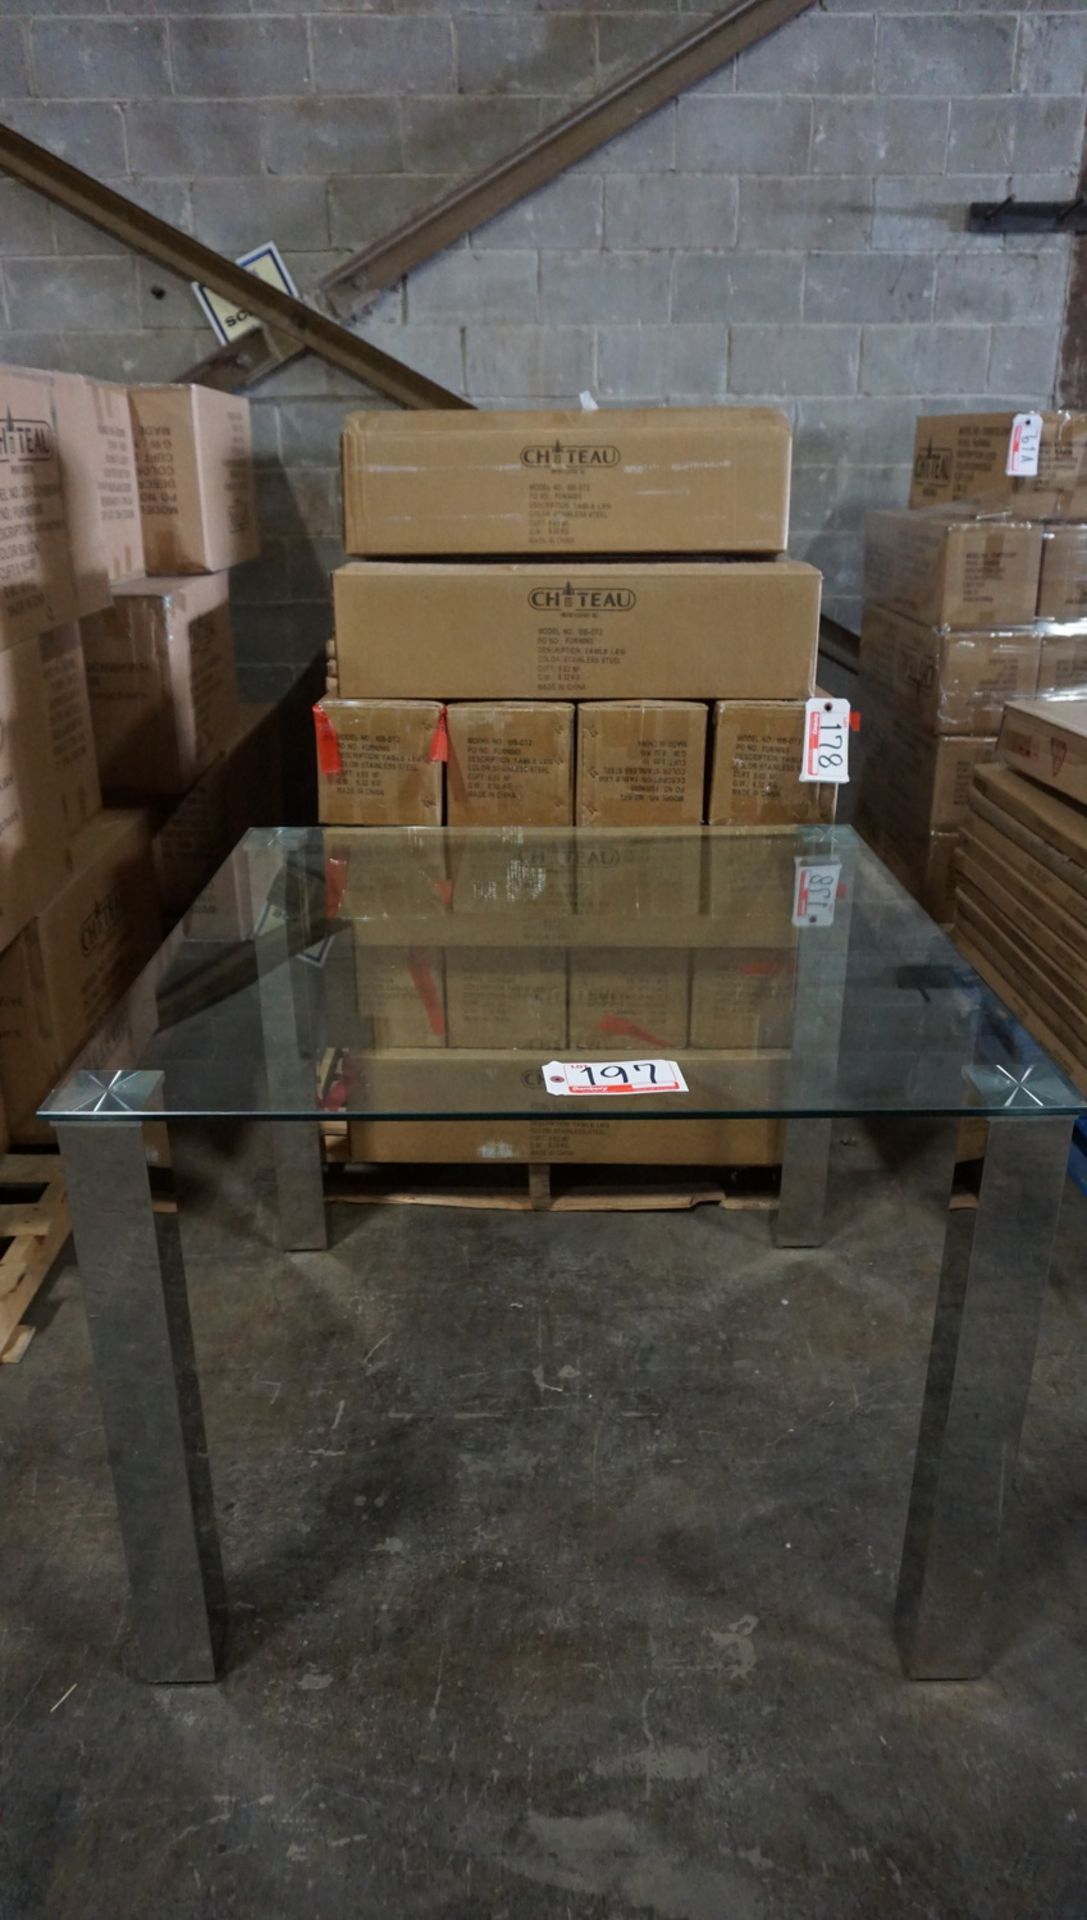 SQUARE CLEAR GLASS DINING TABLE 39"W X 39"L X 30"H W/ CHROME LEGS (10B-DT1) (IN BOX)